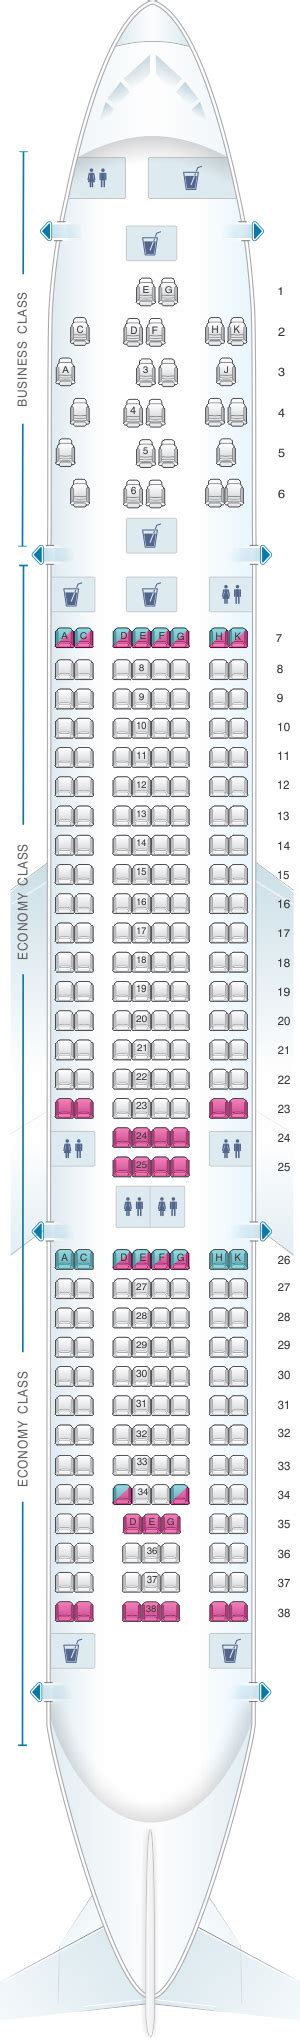 Airbus A330 Seating Chart Tap Portugal Elcho Table